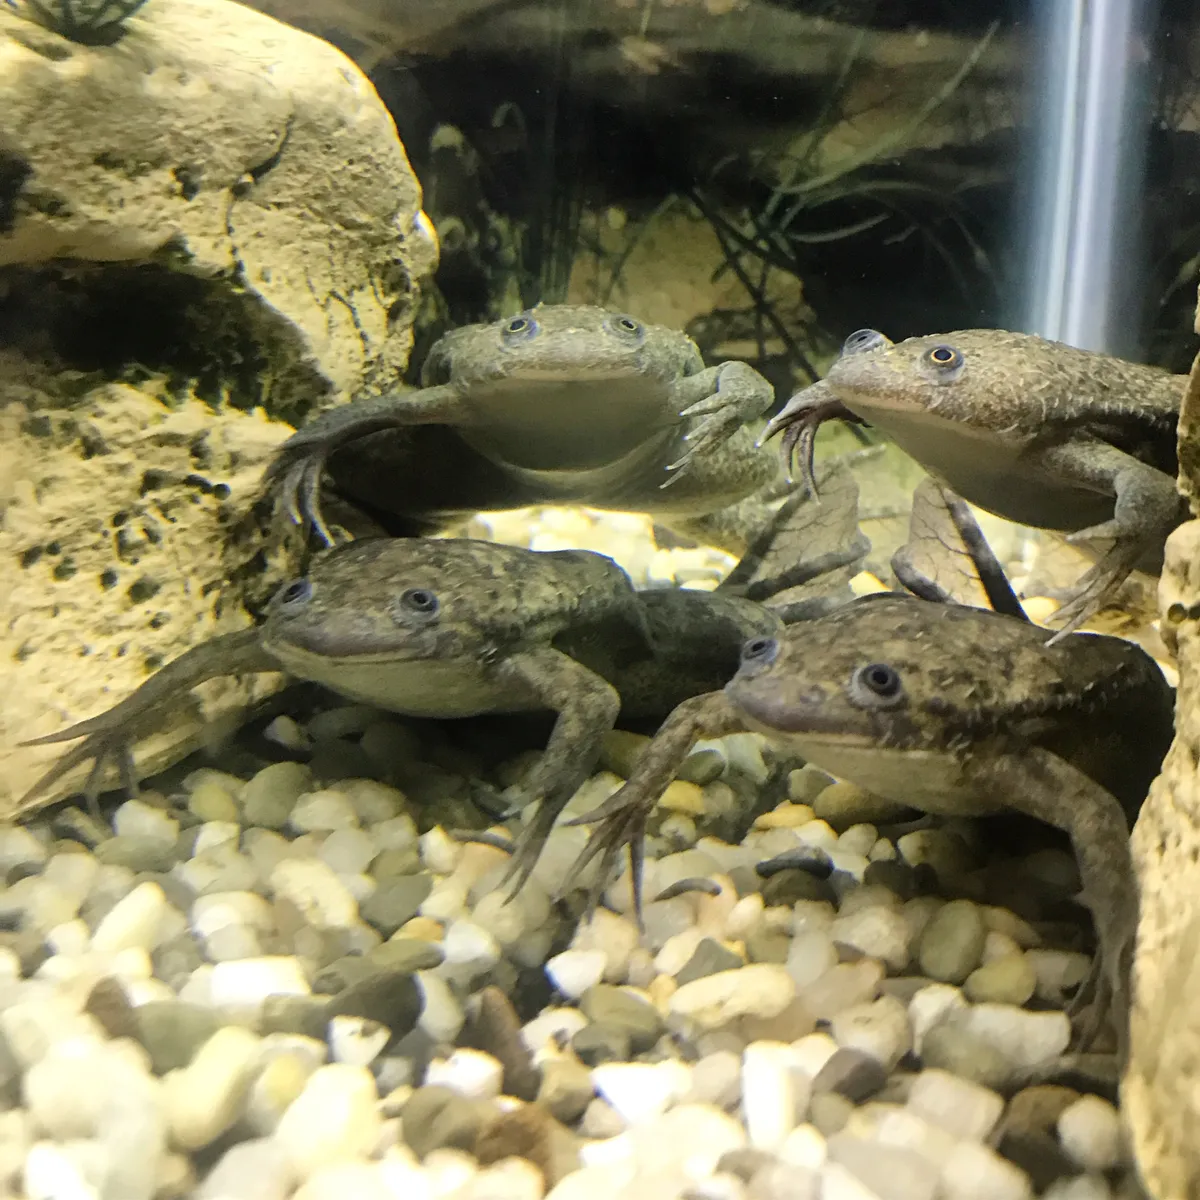 Pet African clawed frogs in an aquarium. © Holly Mahaffey Photography/Getty